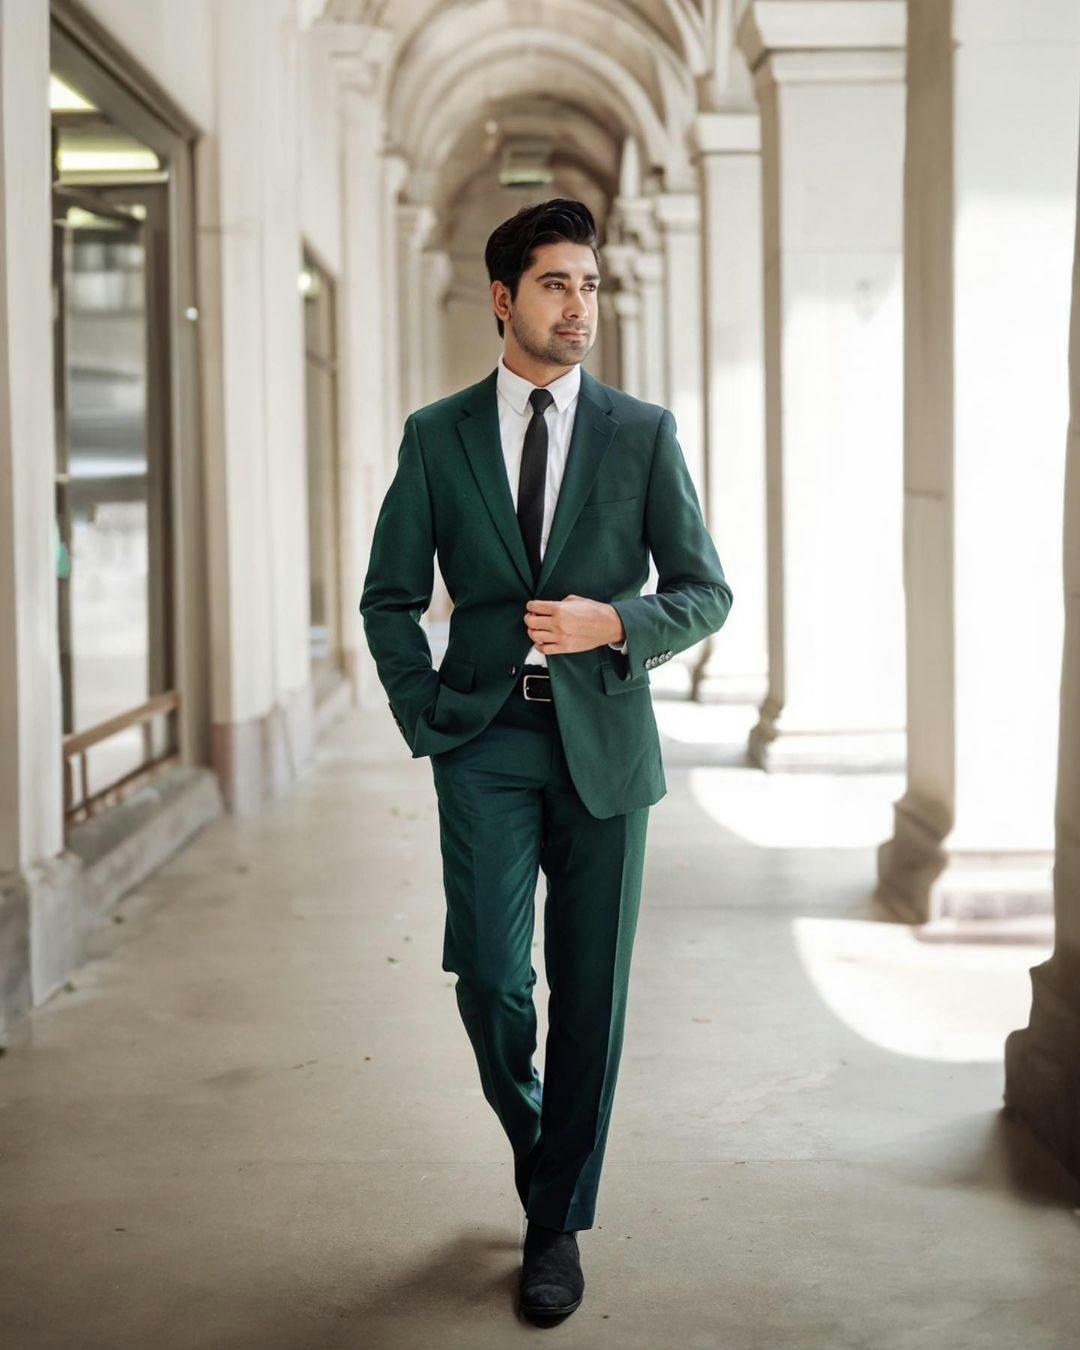 Dark green suit and tie to wear for business.